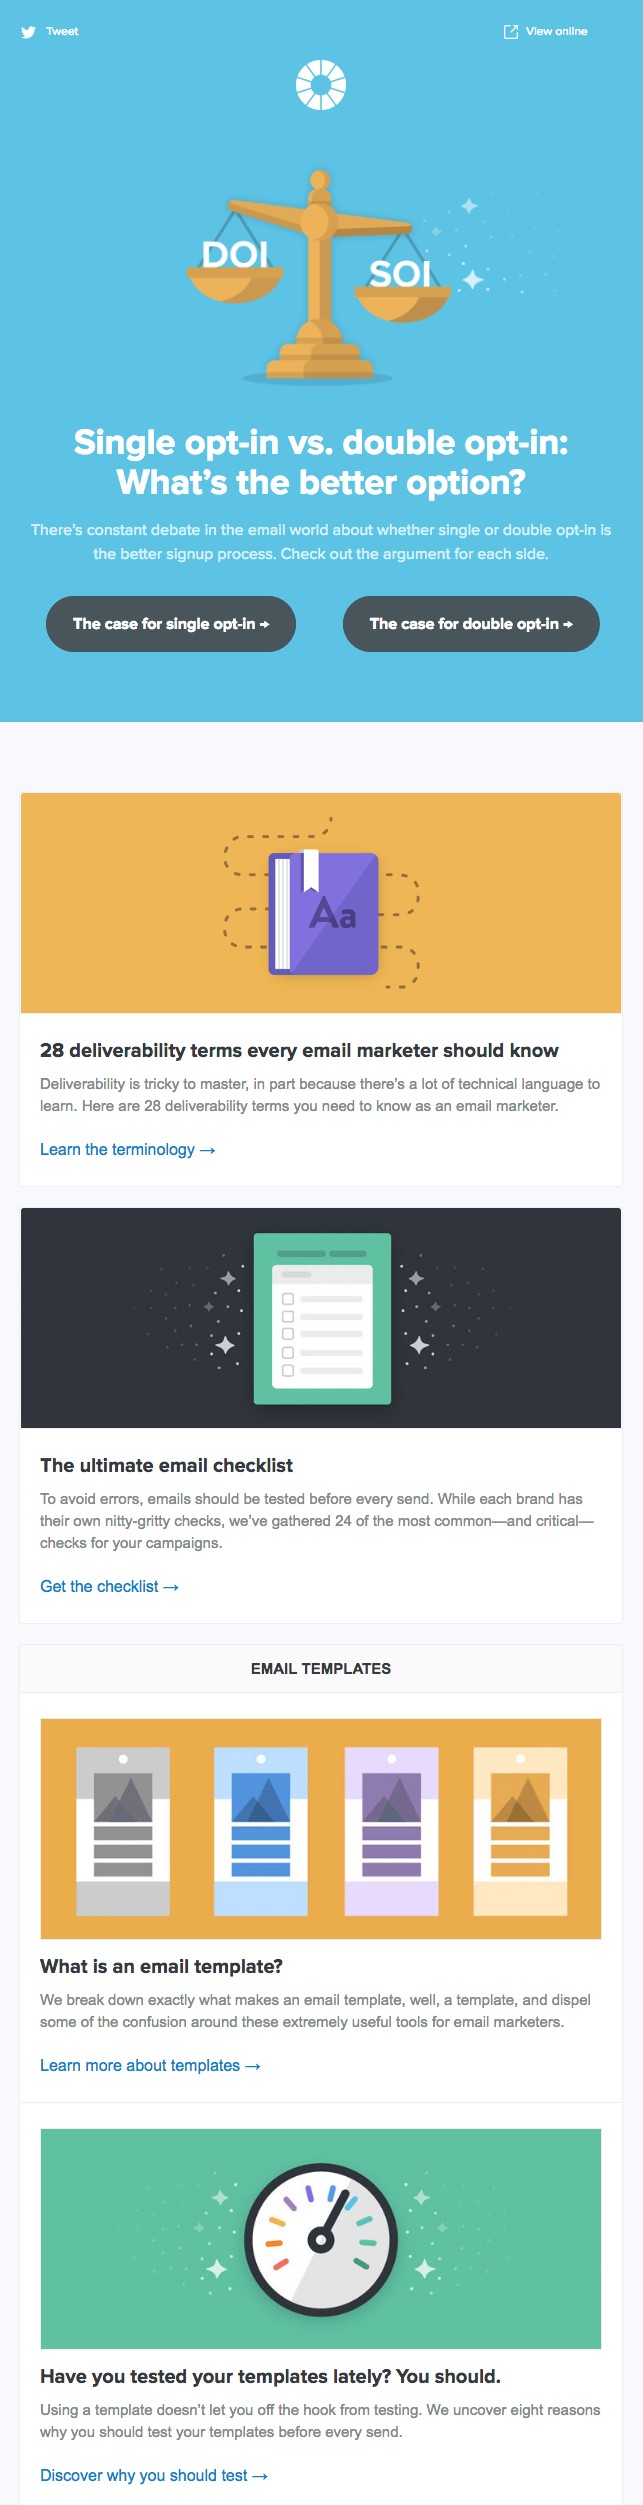 Email newsletter example design with blogs and templates by Litmus